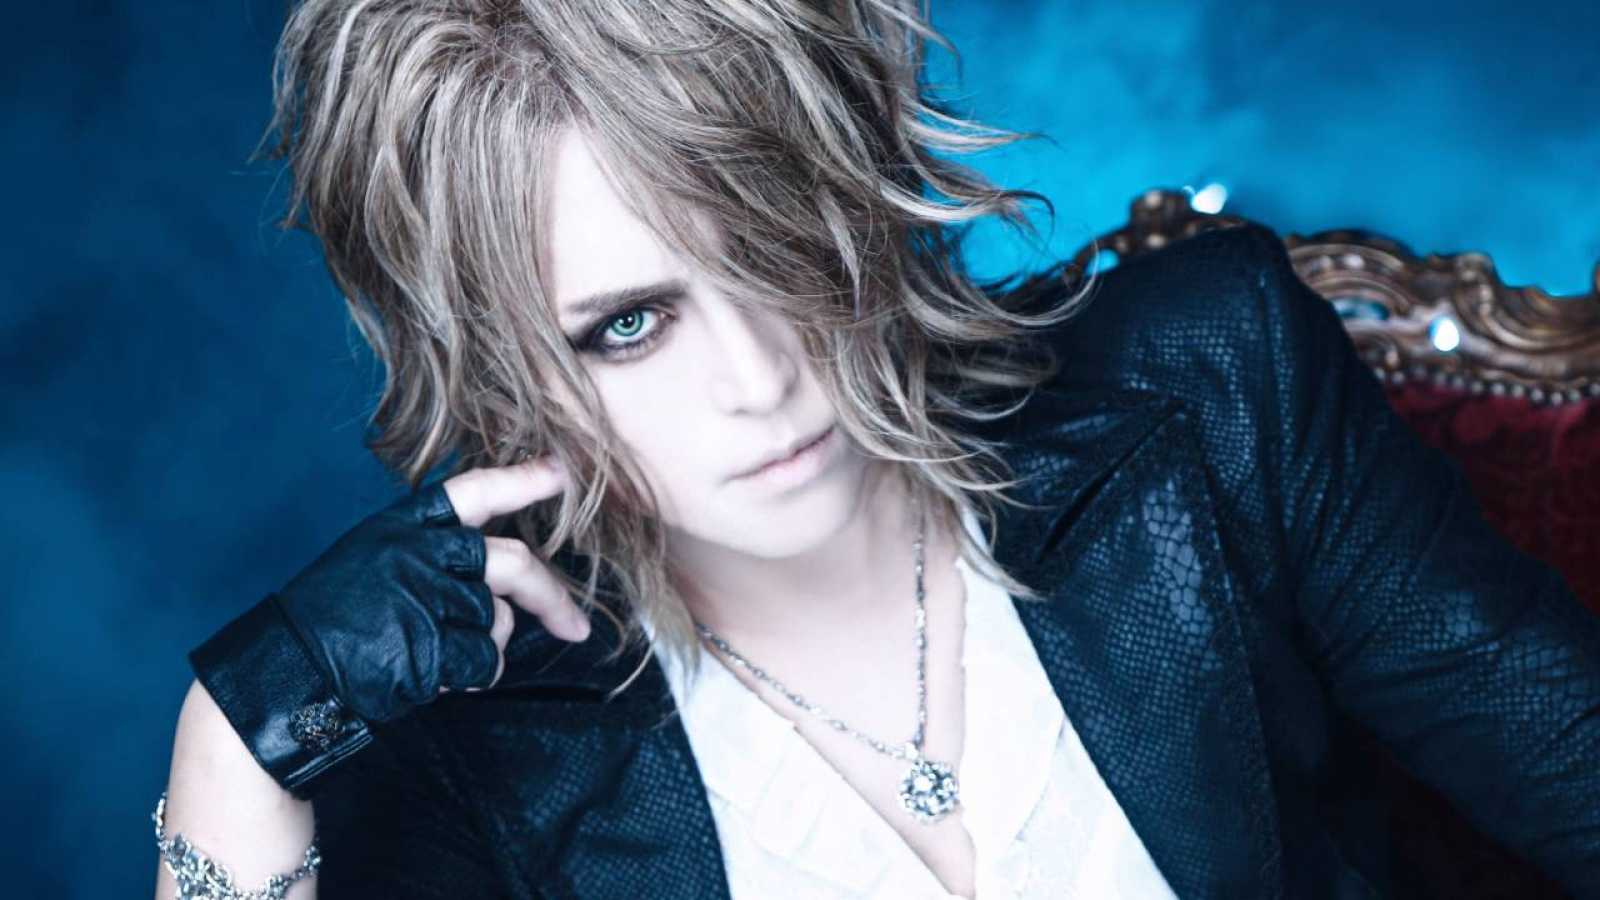 Interview with KAMIJO © CHATEAU AGENCY CO., Ltd. All rights reserved.